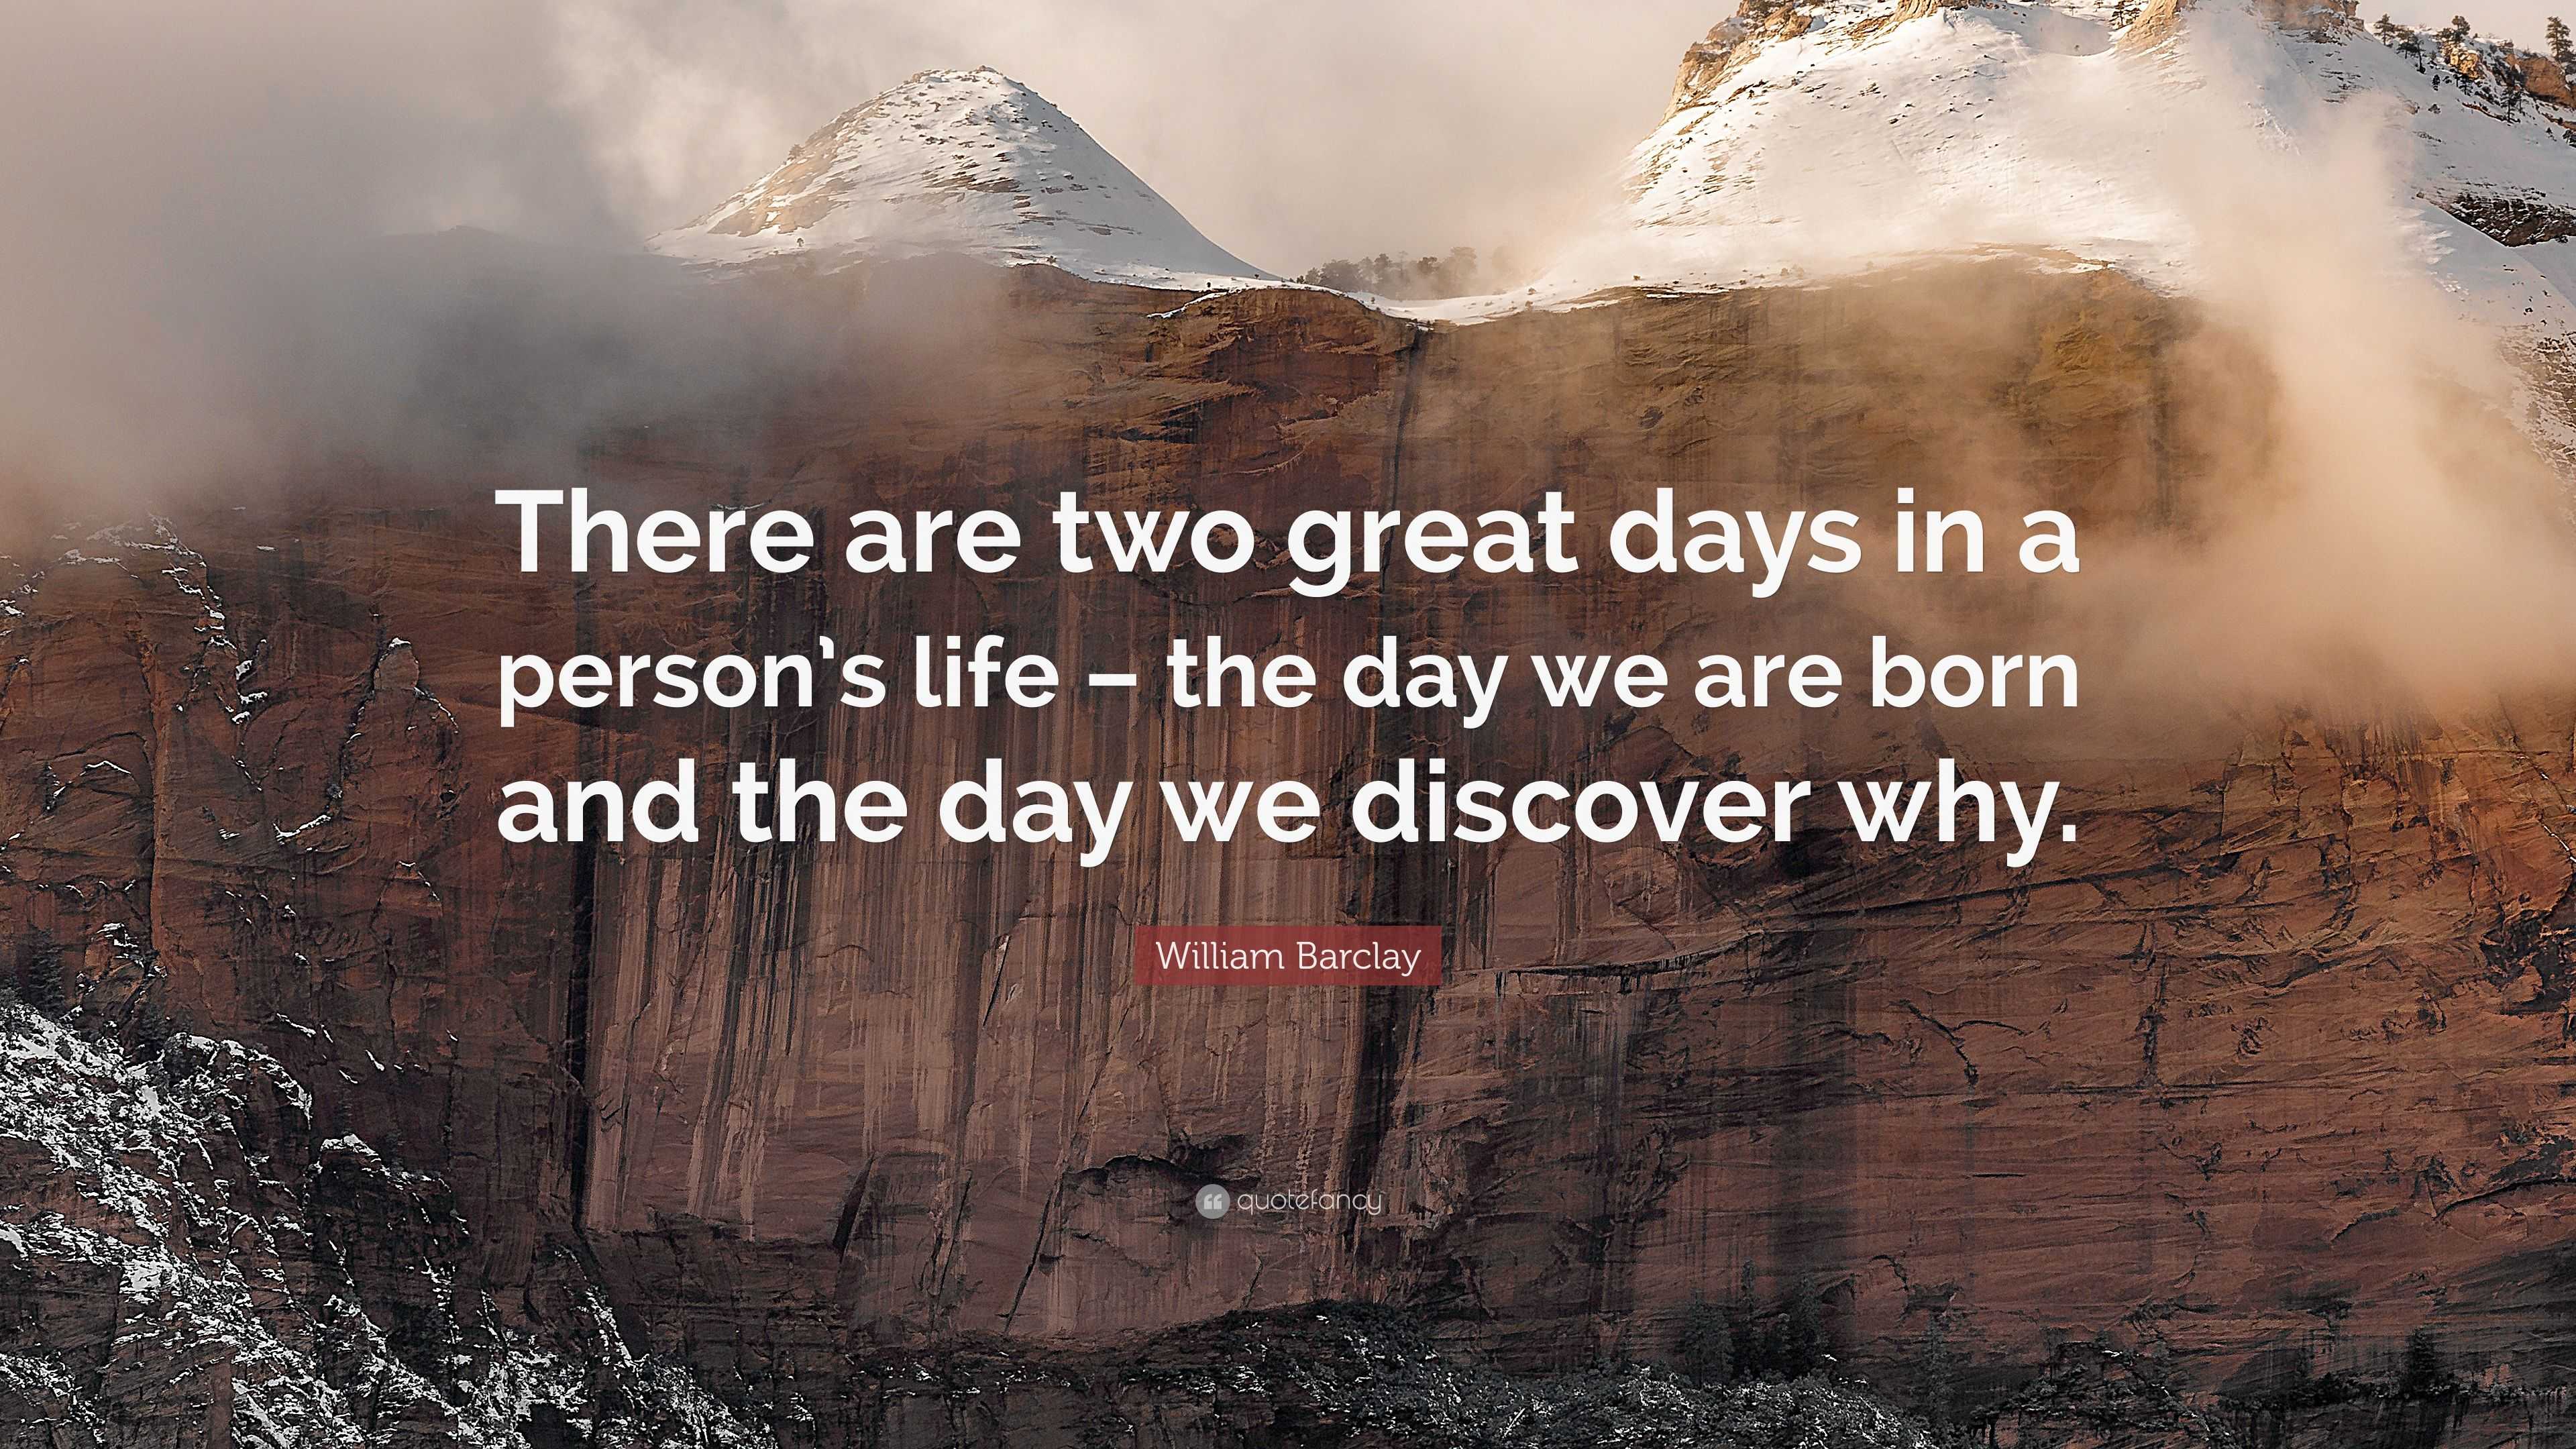 William Barclay Quote: "There are two great days in a ...